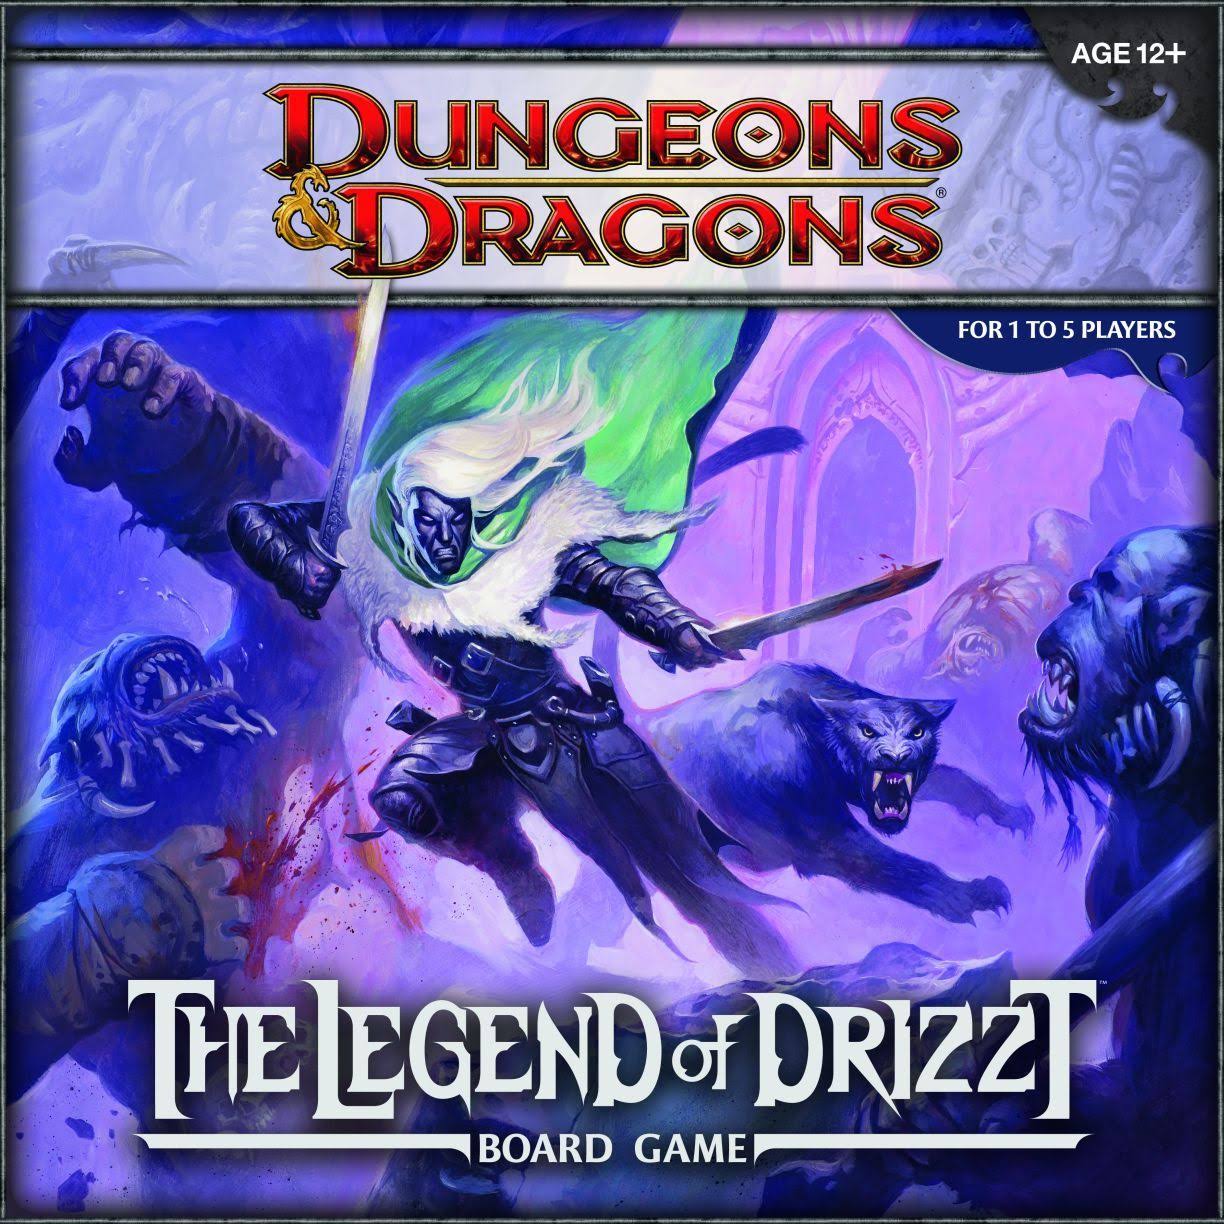 Dungeons & Dragons Legend of Drizzt Board Game